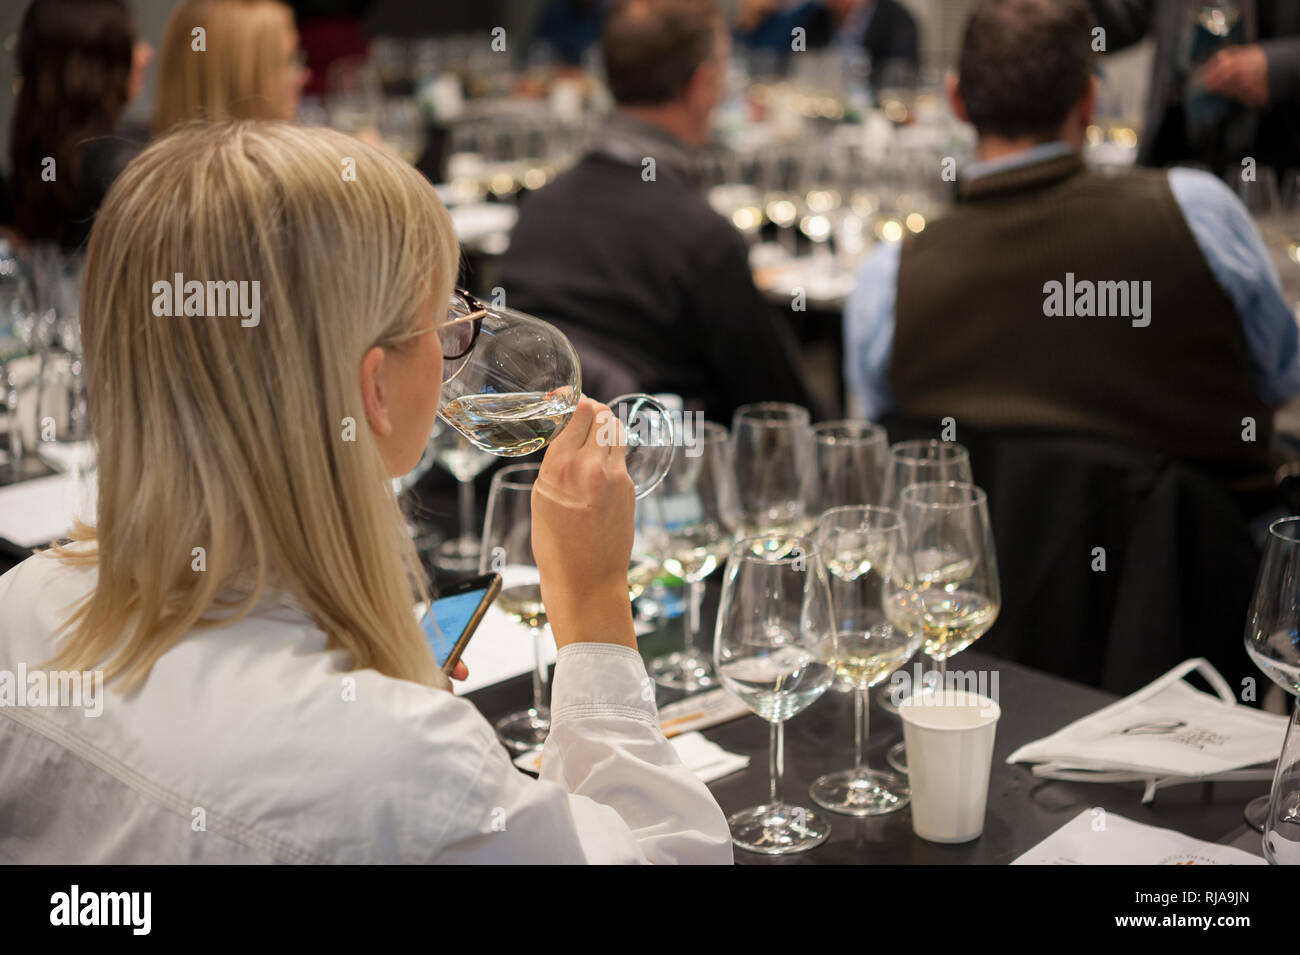 People tasting white wine during a masterclass. Blonde female in the foreground Stock Photo